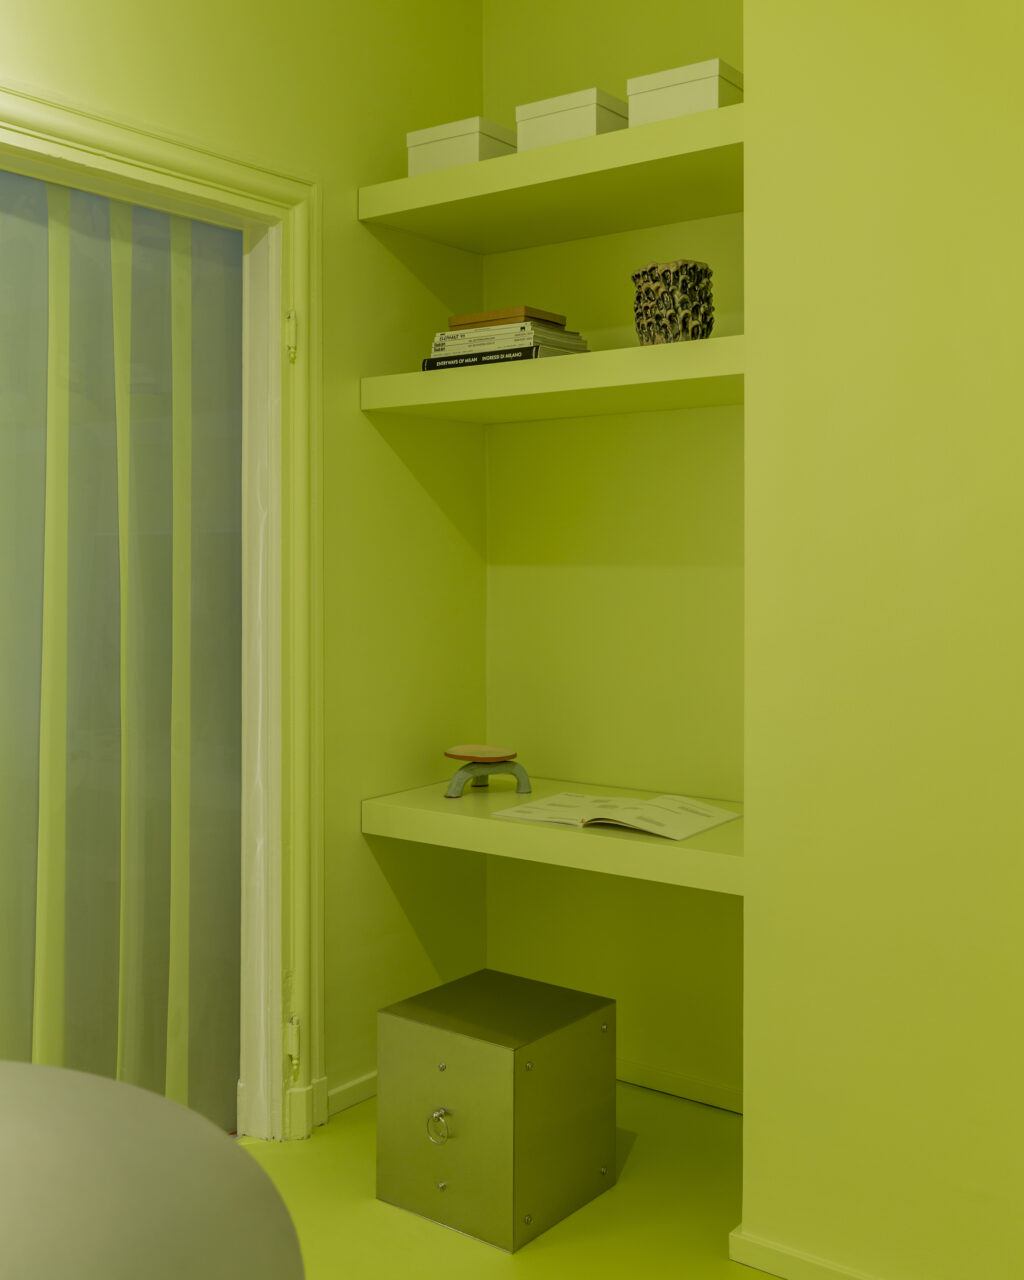 A room and its bookshelves are all acid green